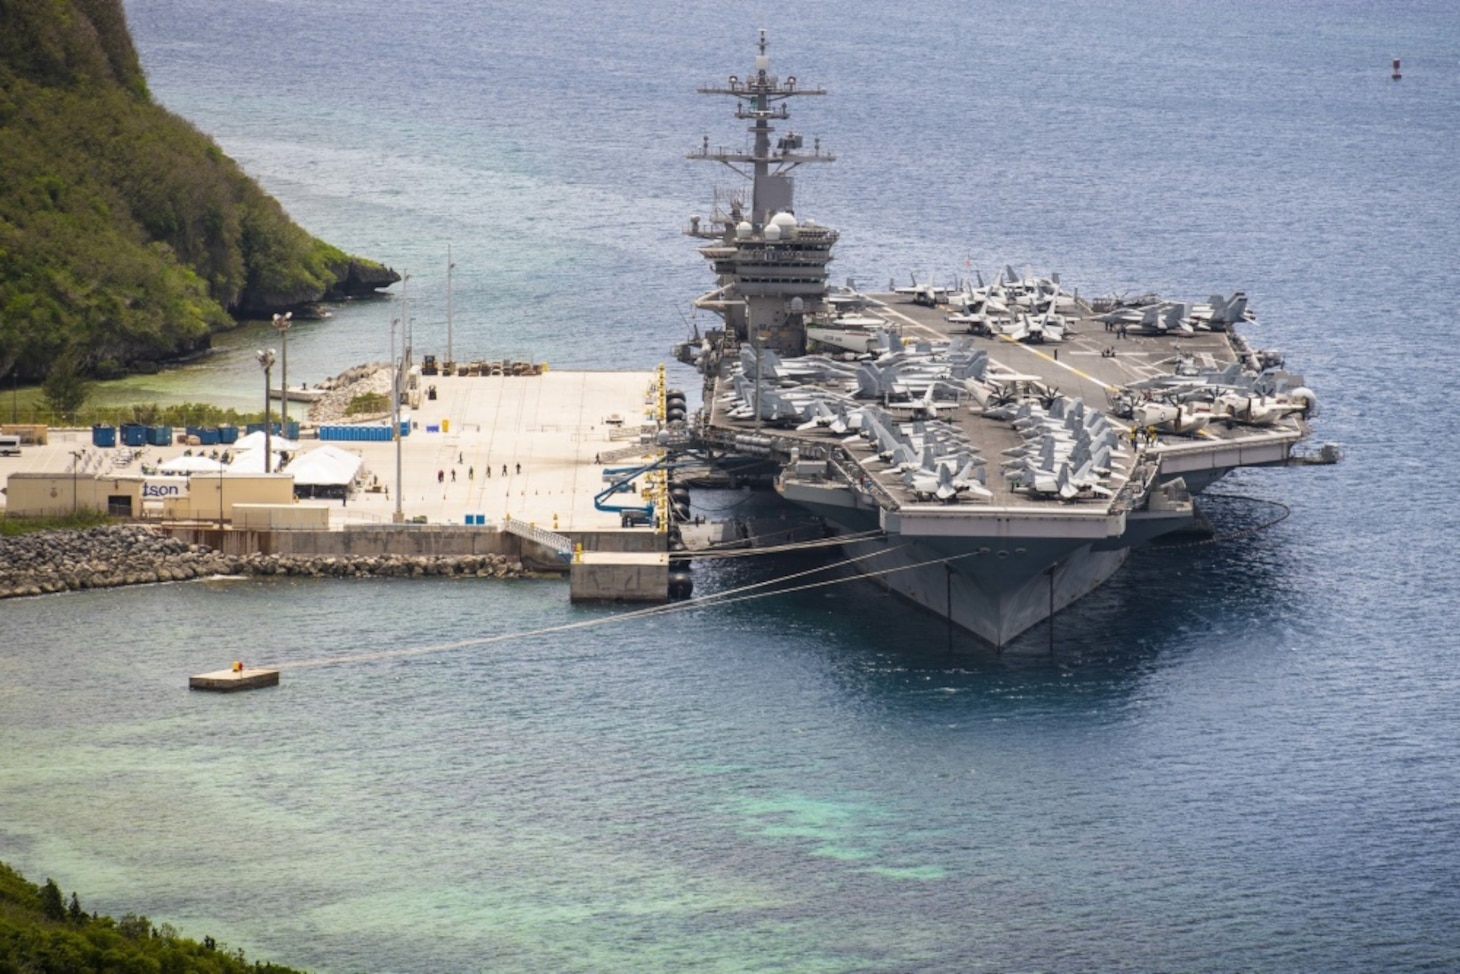 NAVAL BASE GUAM (May 15, 2020) The aircraft carrier USS Theodore Roosevelt (CVN 71) is moored pier side at Naval Base Guam May 15, 2020. Theodore Roosevelt's COVID-negative crew returned from quarantine beginning on April 29 and is making preparations to return to sea to continue their scheduled deployment to the Indo-Pacific.